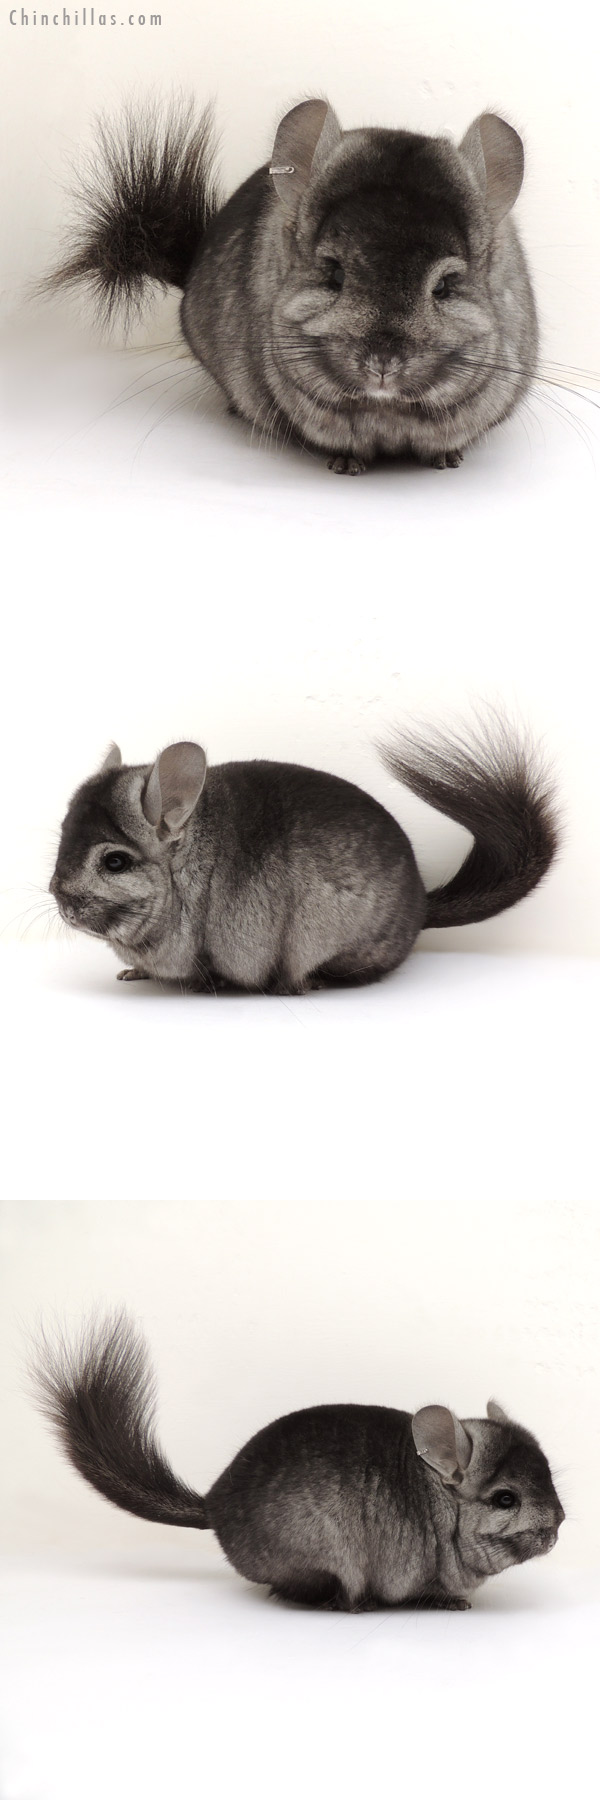 Chinchilla or related item offered for sale or export on Chinchillas.com - 14018 Exceptional Ebony Royal Persian Angora Male Chinchilla